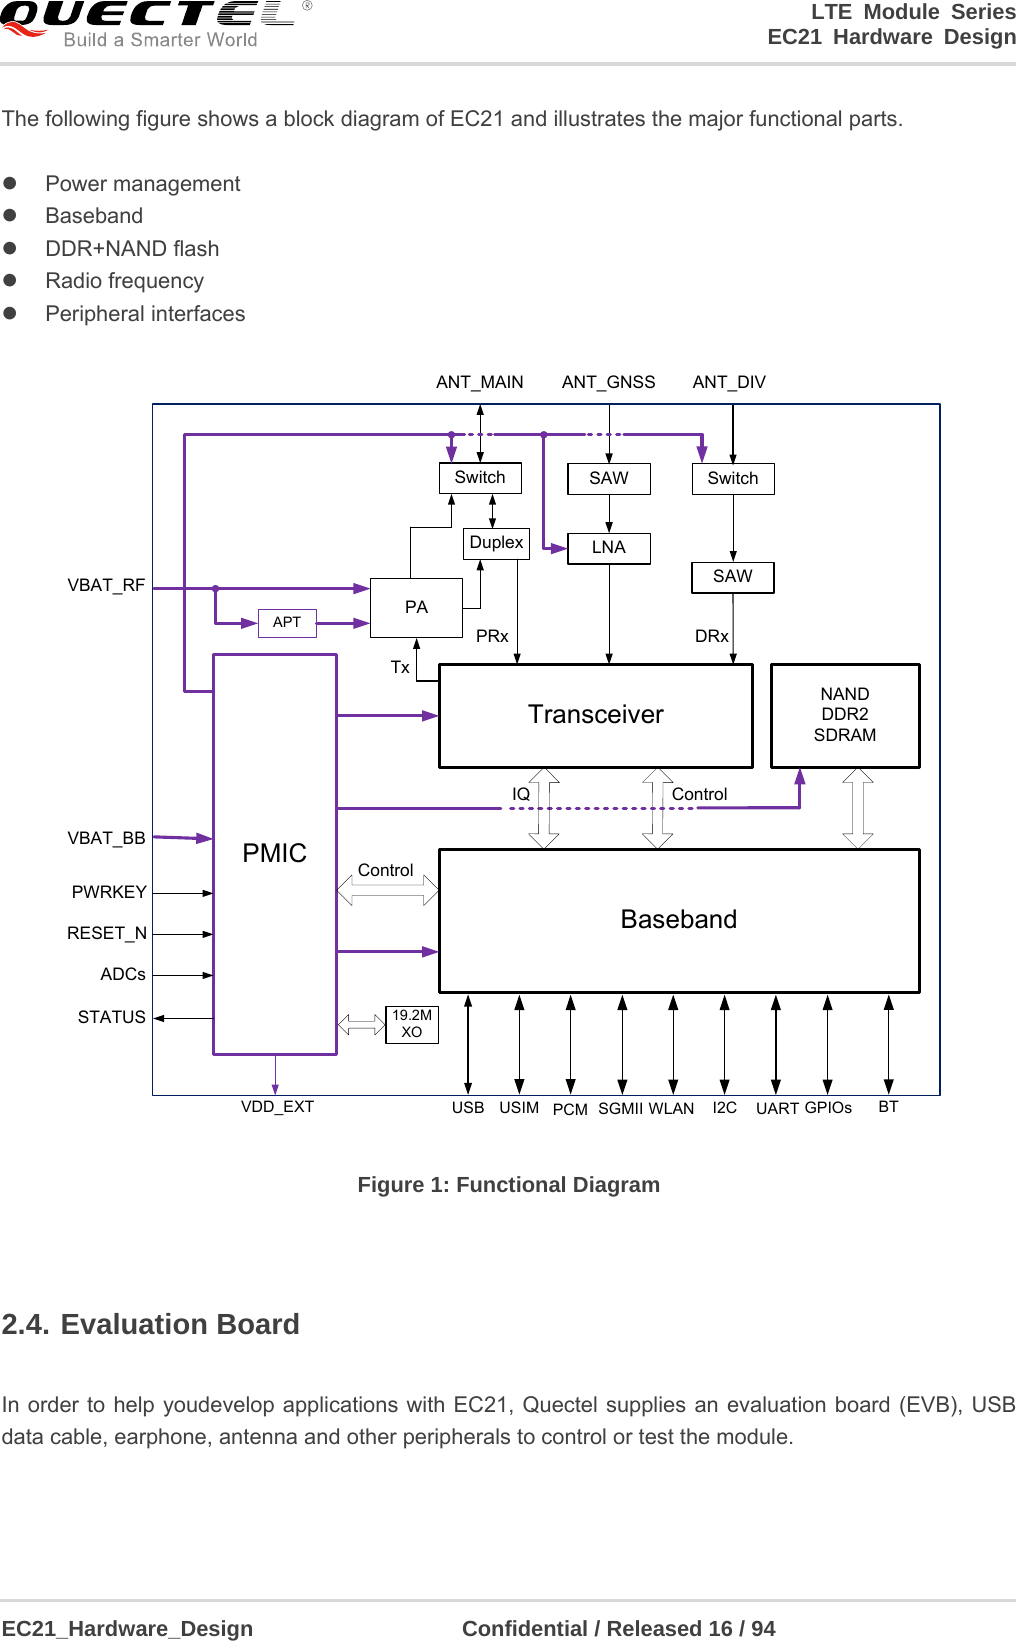 LTE Module Series                                                                 EC21 Hardware Design  EC21_Hardware_Design                   Confidential / Released 16 / 94    The following figure shows a block diagram of EC21 and illustrates the major functional parts.     Power management  Baseband  DDR+NAND flash  Radio frequency   Peripheral interfaces BasebandPMICTransceiverNANDDDR2SDRAMPASwitchLNASwitchANT_MAIN ANT_DIVANT_GNSSVBAT_BBVBAT_RFAPTPWRKEYADCsVDD_EXT USB USIM PCM UARTI2CRESET_N19.2MXOSTATUSGPIOsSAWControlIQ ControlDuplexSAWTxPRx DRxSGMII WLAN BT Figure 1: Functional Diagram  2.4. Evaluation Board  In order to help youdevelop applications with EC21, Quectel supplies an evaluation board (EVB), USB data cable, earphone, antenna and other peripherals to control or test the module.